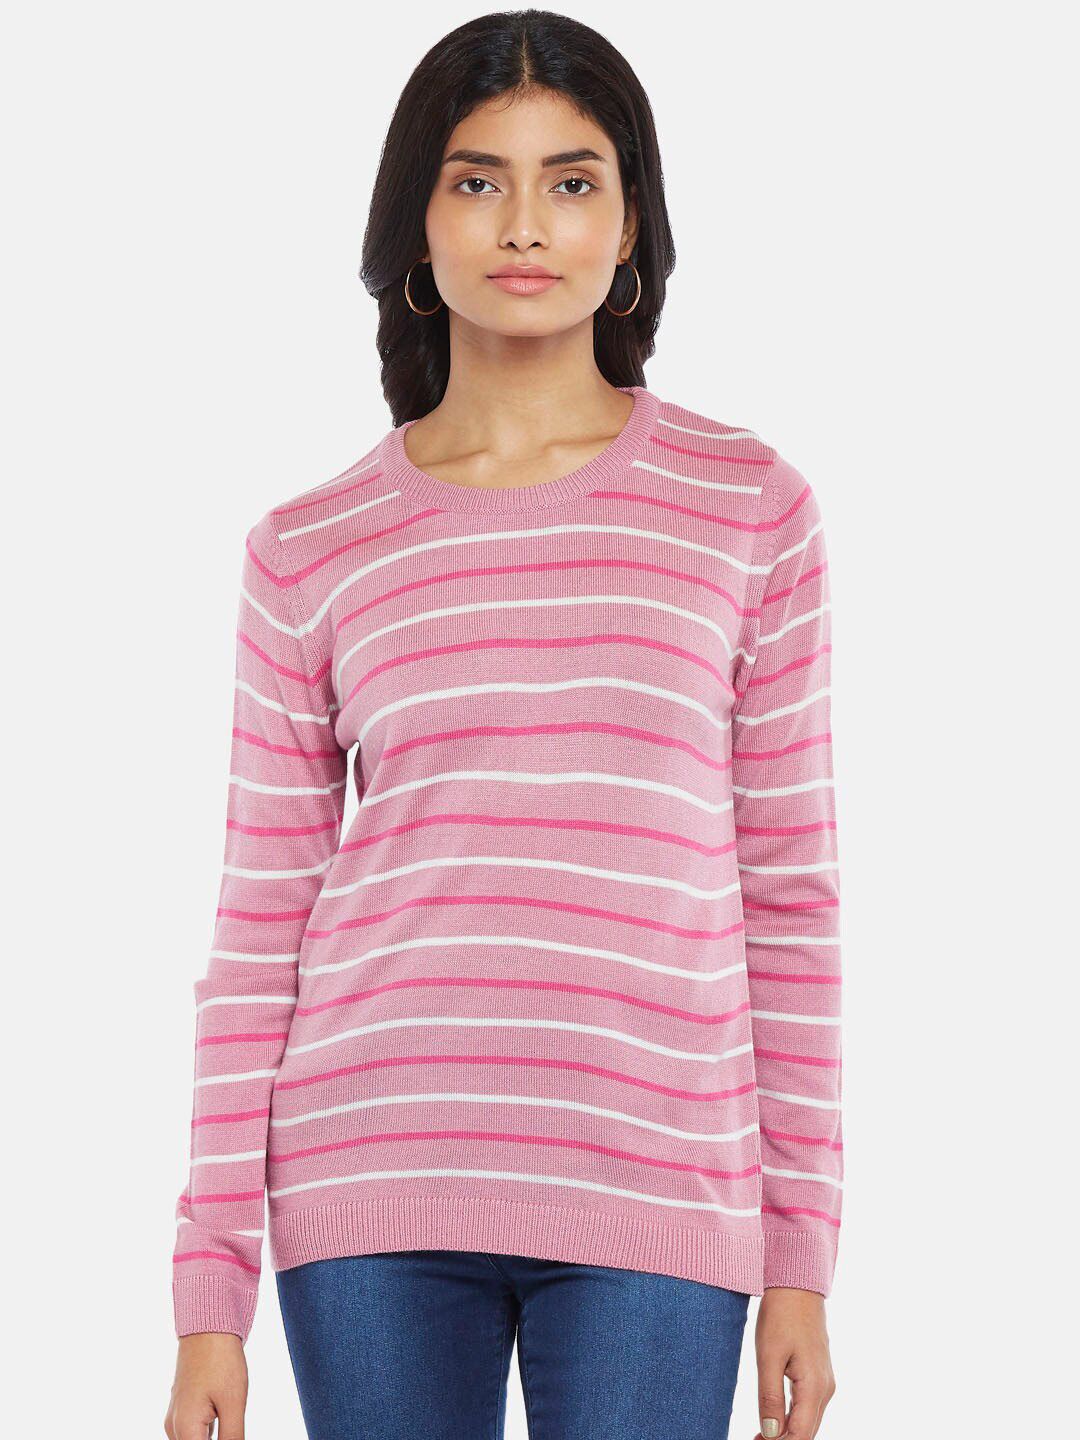 Honey by Pantaloons Pink & White Striped Top Price in India